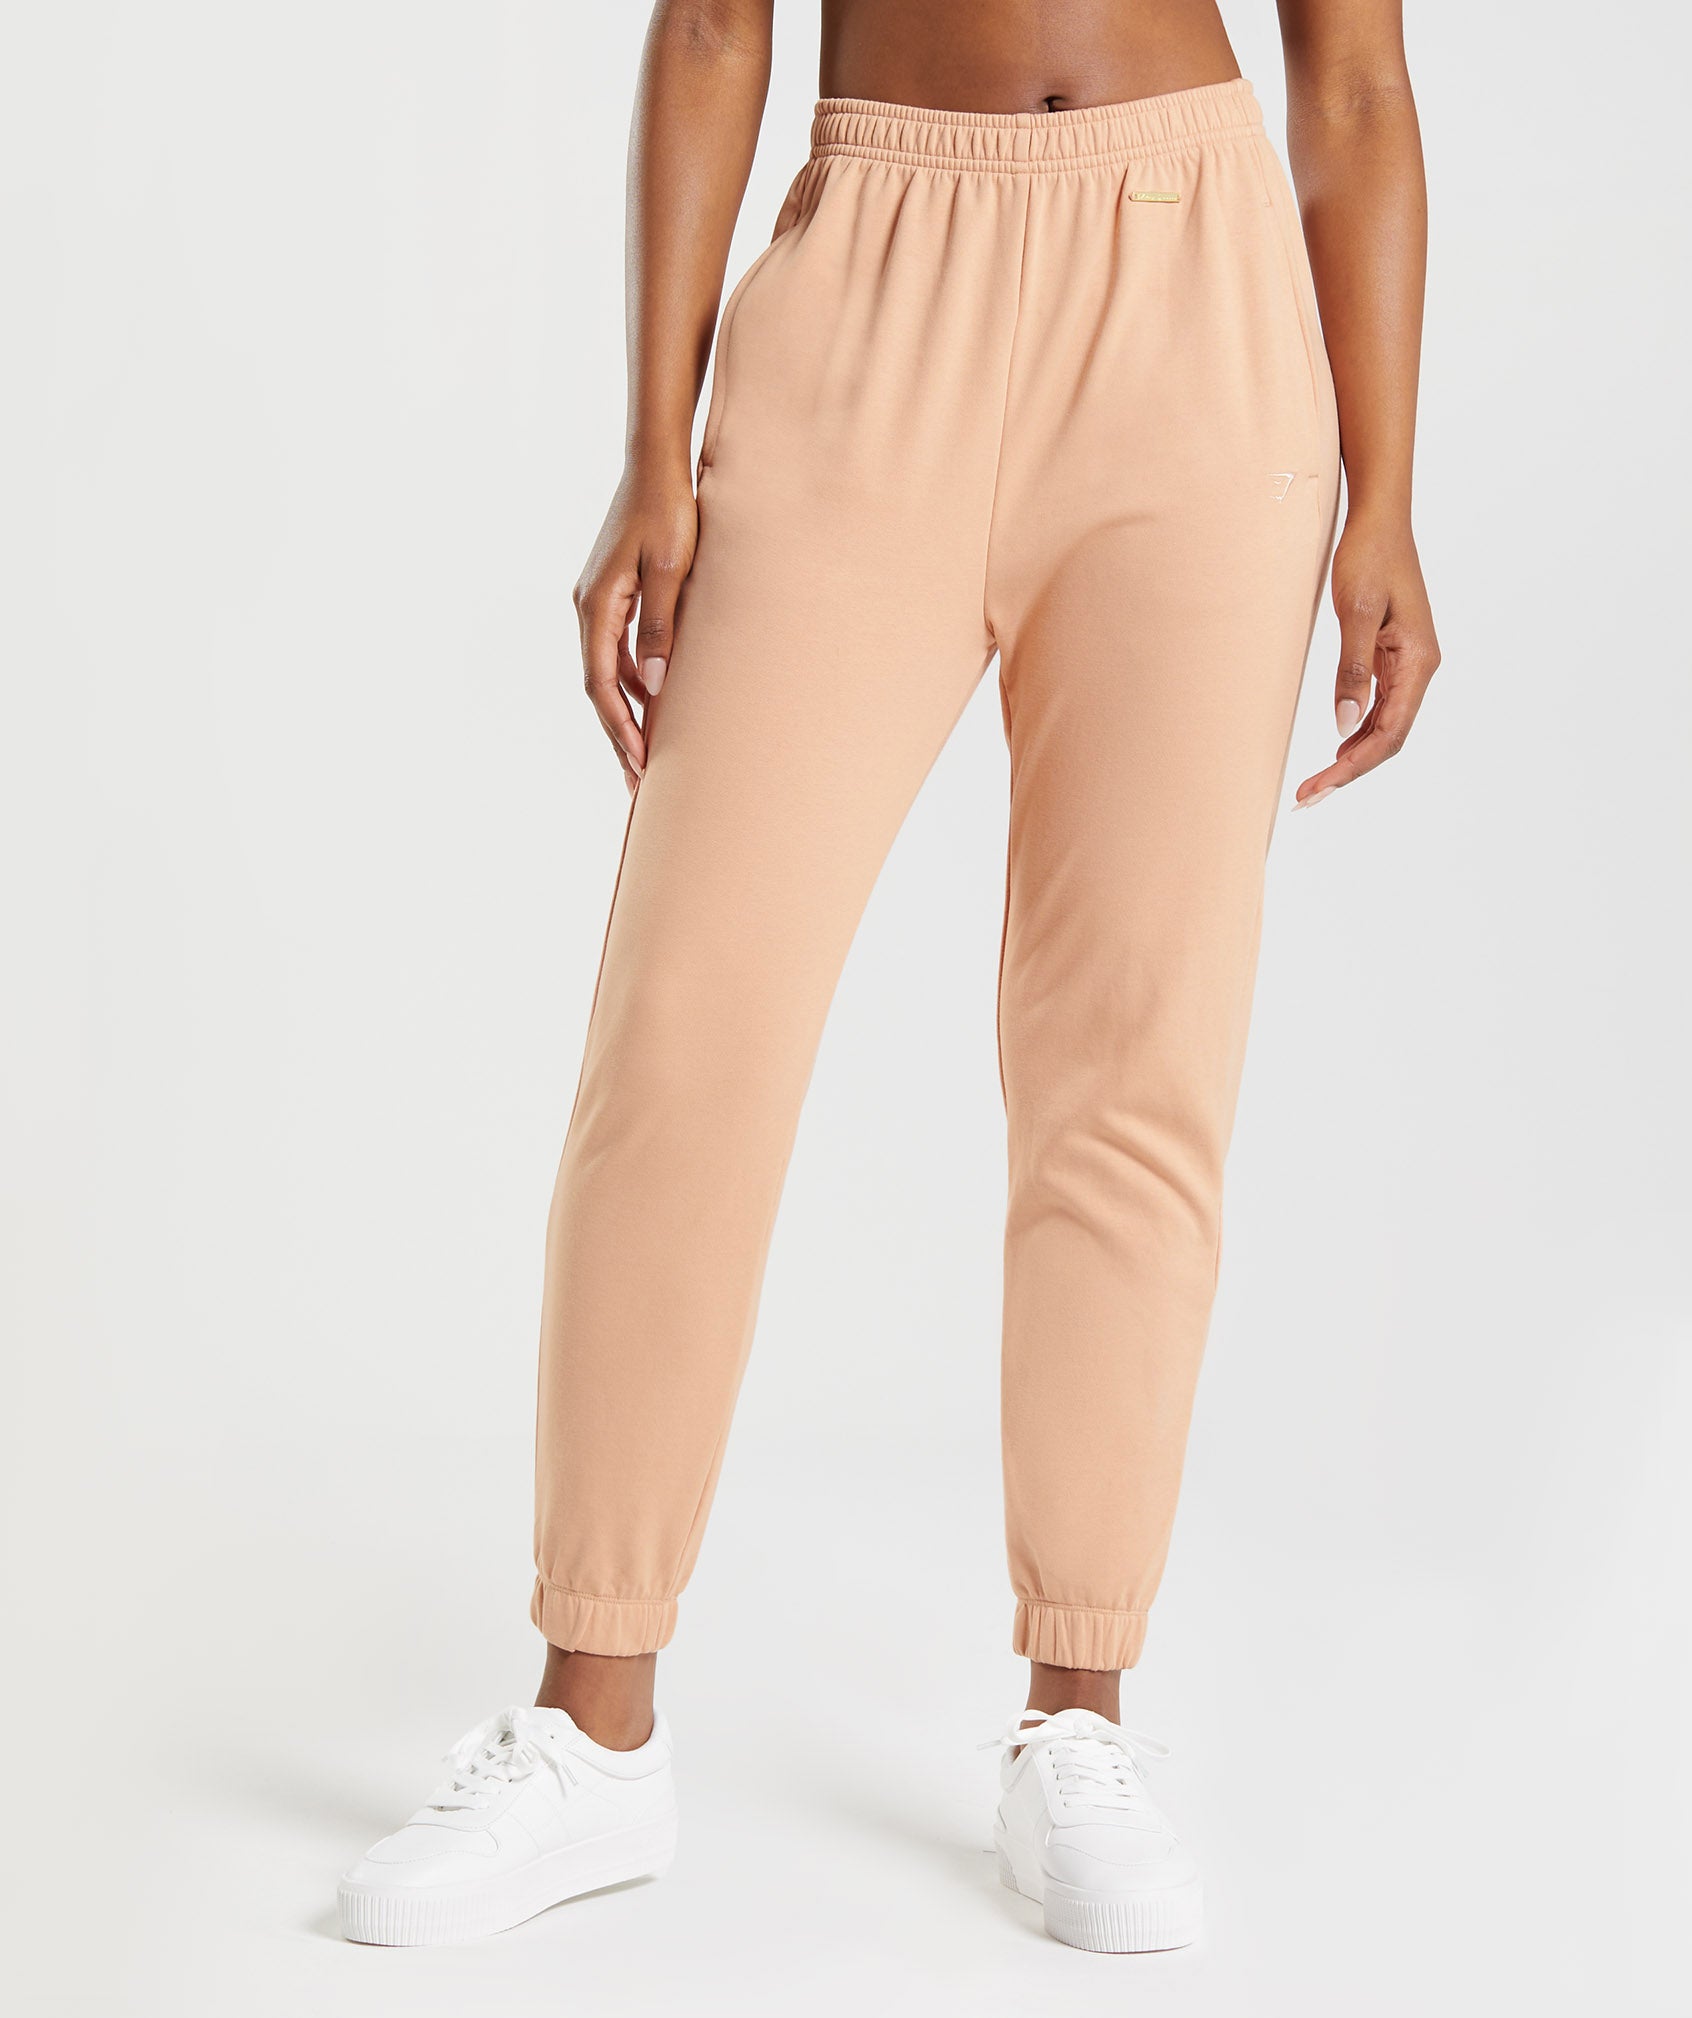 Whitney Loose Joggers in Sunset Beige - view 1